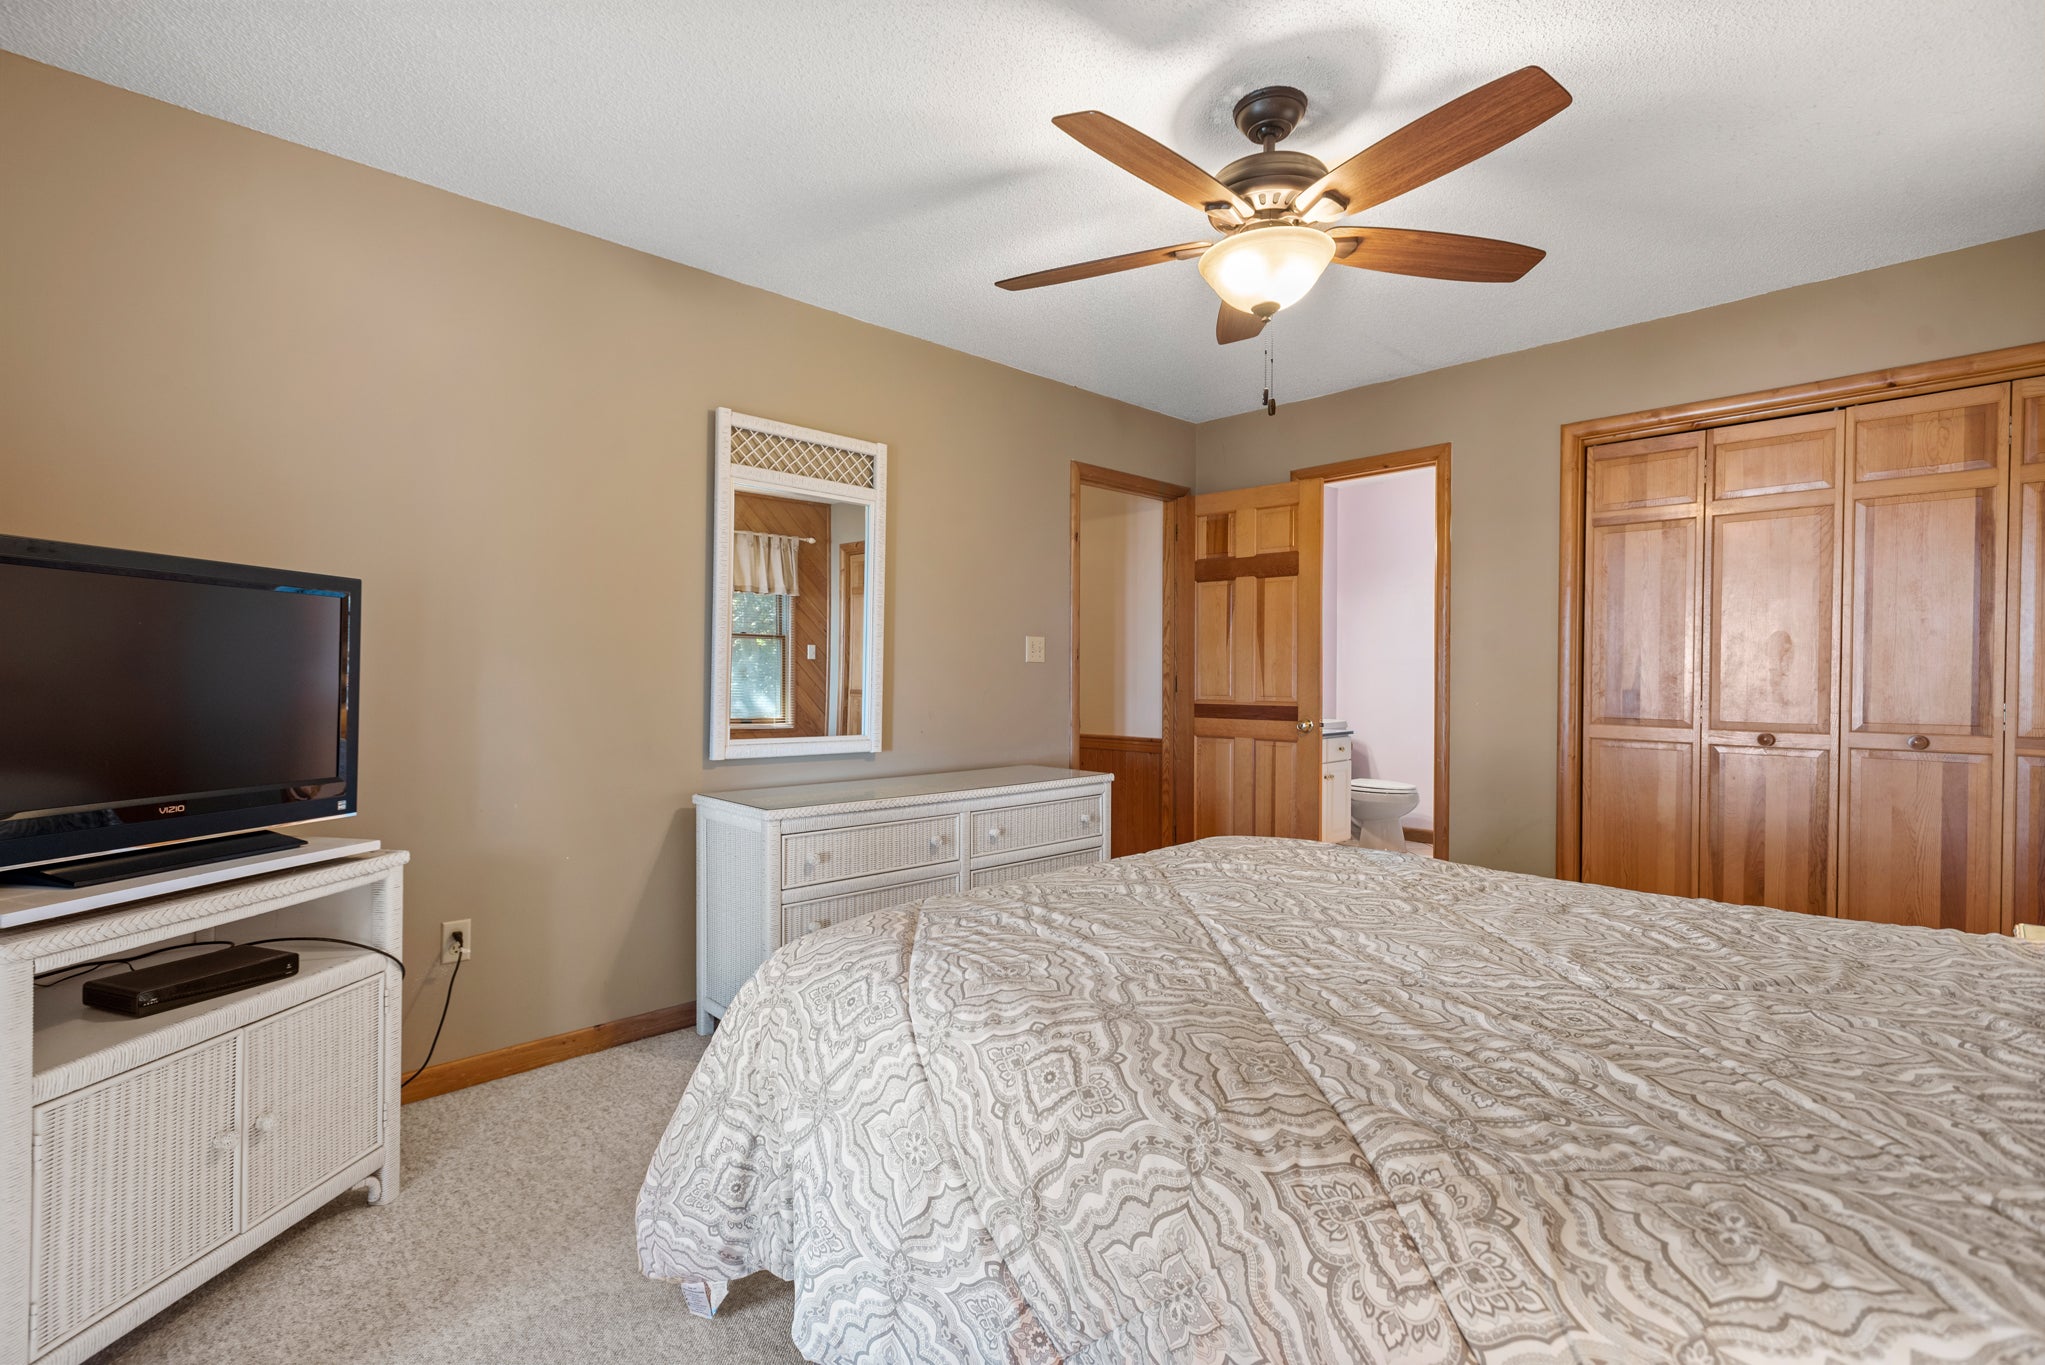 CL344: Tequila Sunset | Mid Level Bedroom 4